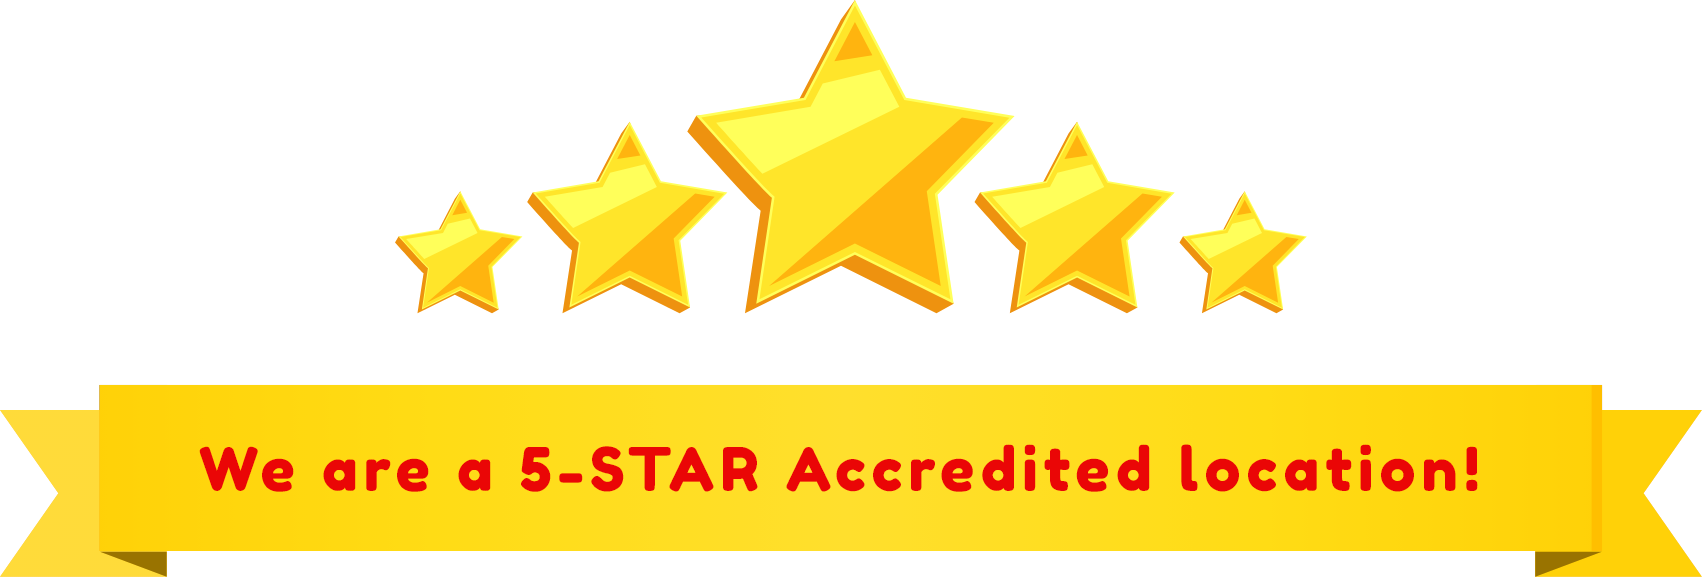 Five star rating